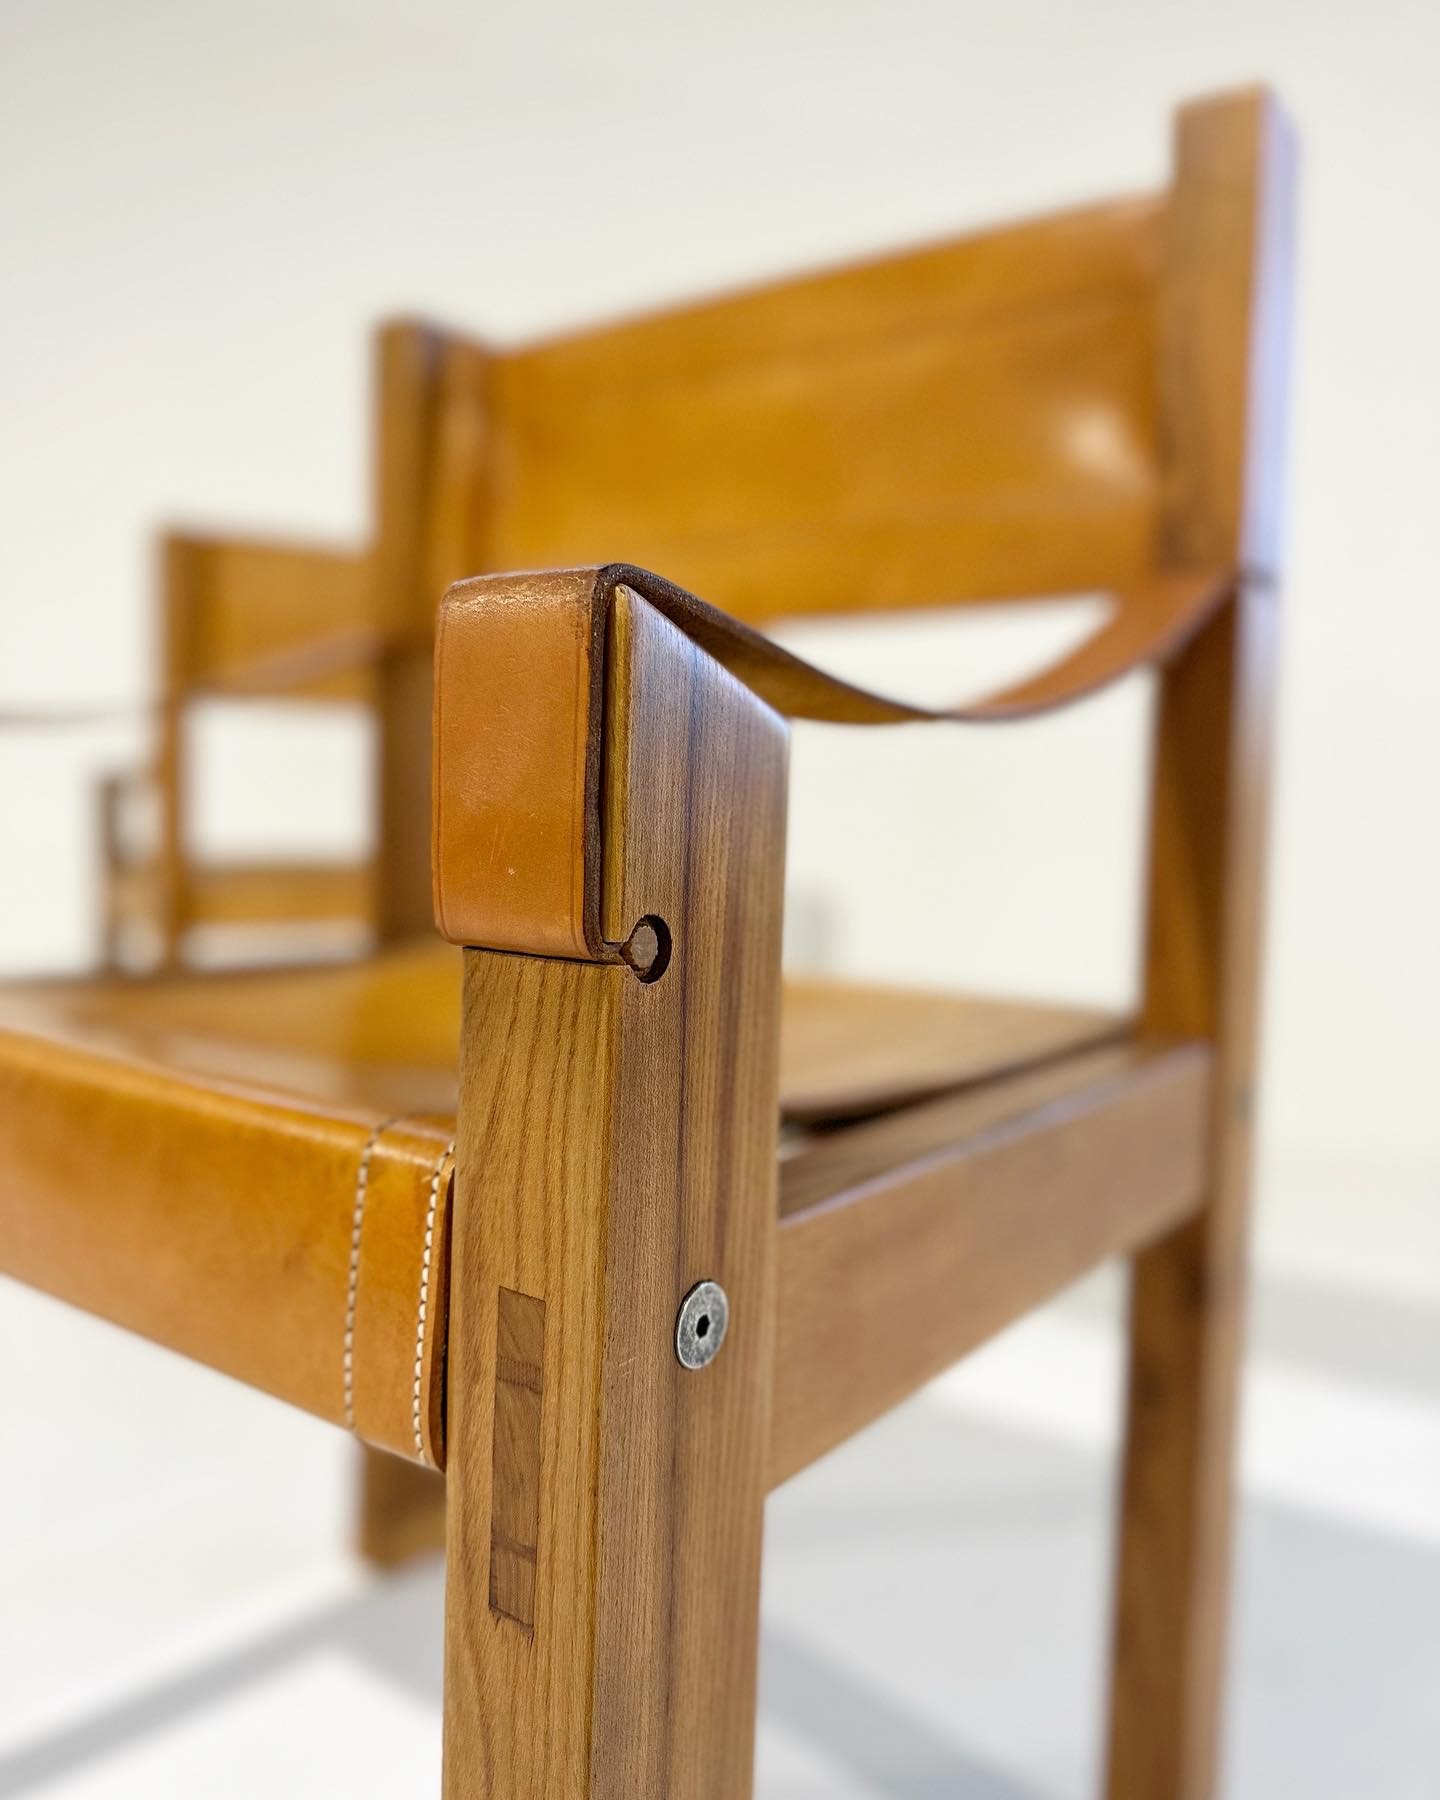 a close up of a wooden chair with a leather seat